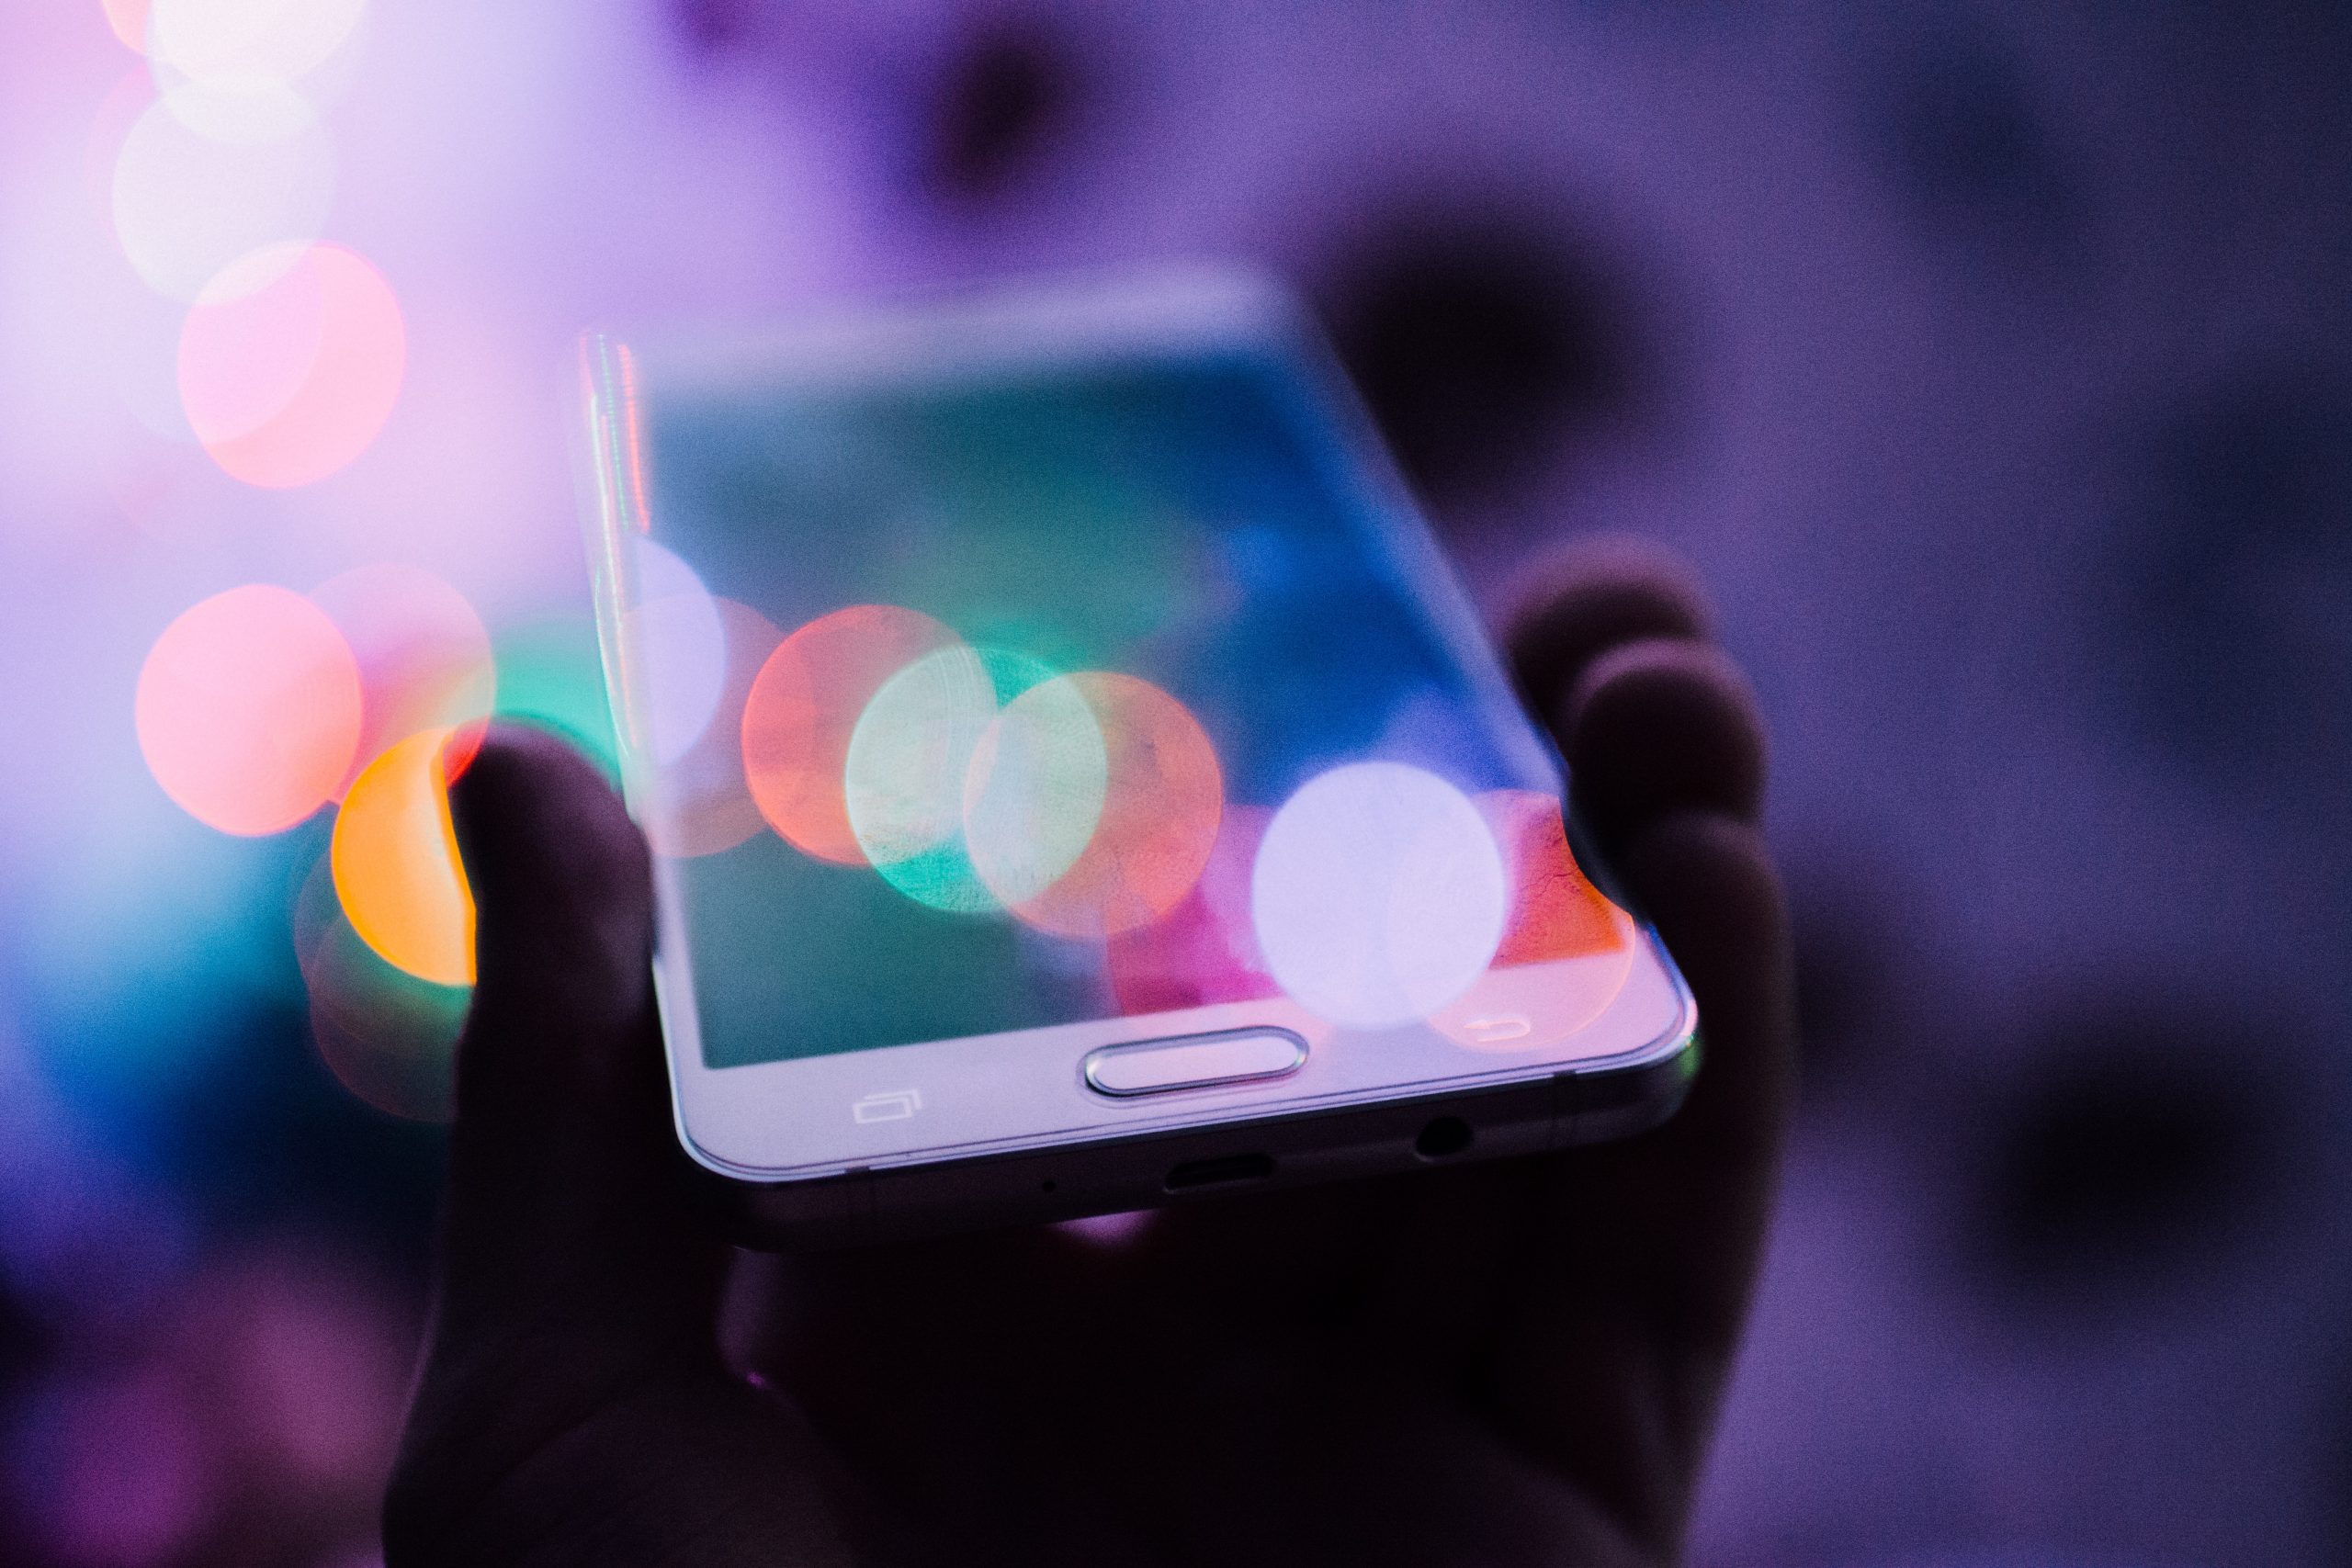 Photograph of hand holding smartphone, with blur of rainbow-like circles of light blurring on top